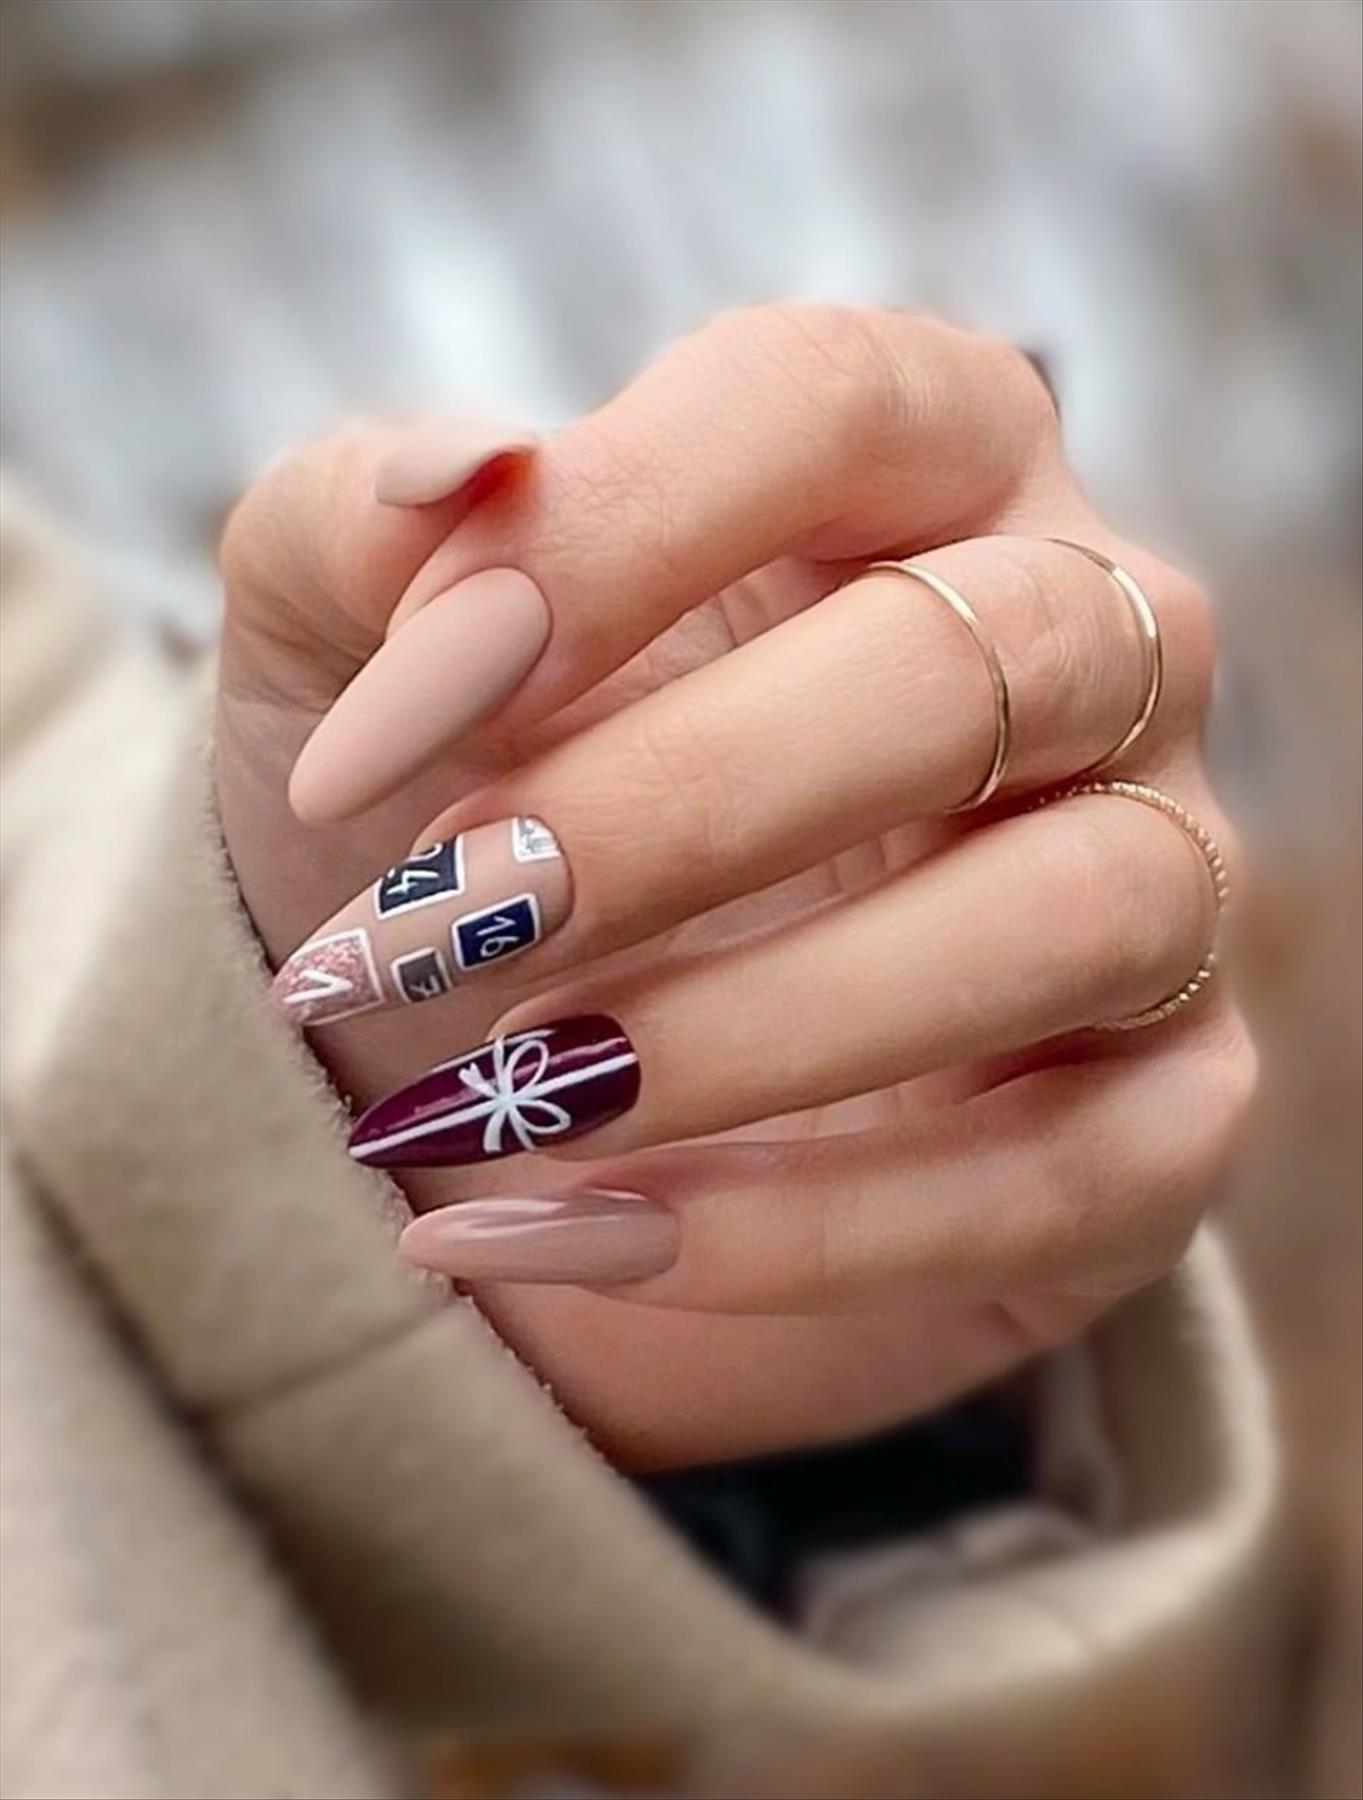 Trendy Winter nails almond-shaped nails to try